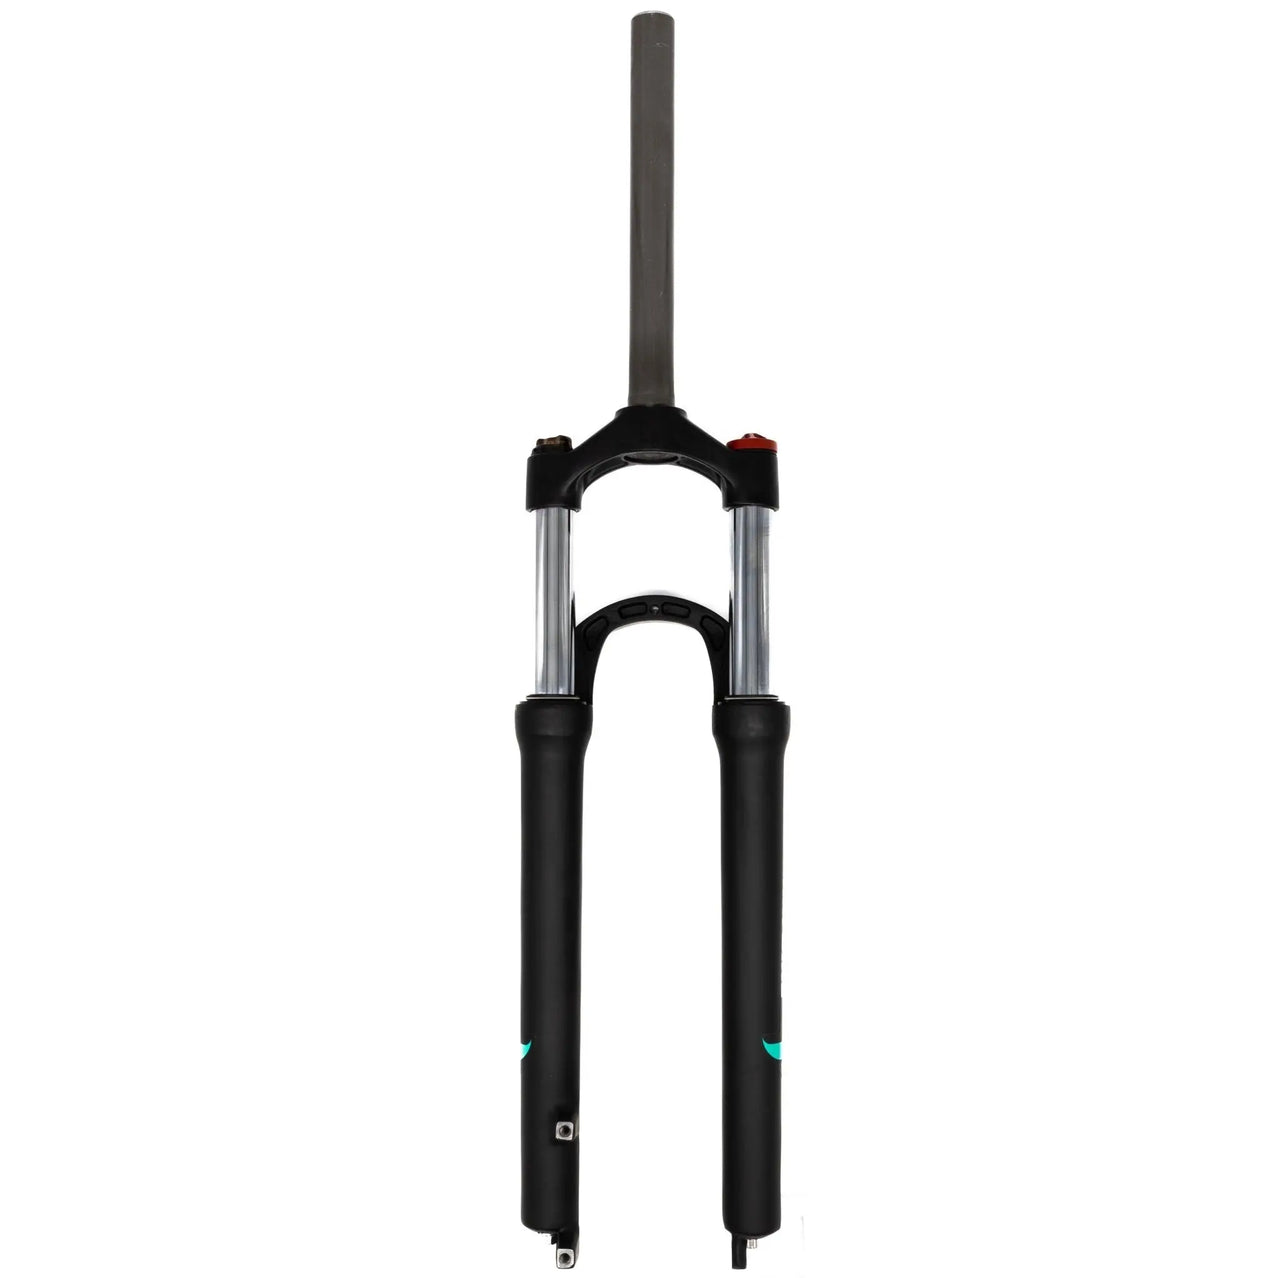 27.5 Inch Tapered Suspension Fork Black Air Bike XC28 100mm Travel & Lockout Mountain Bike Quick Release Fork - Air BikeSuspension Fork